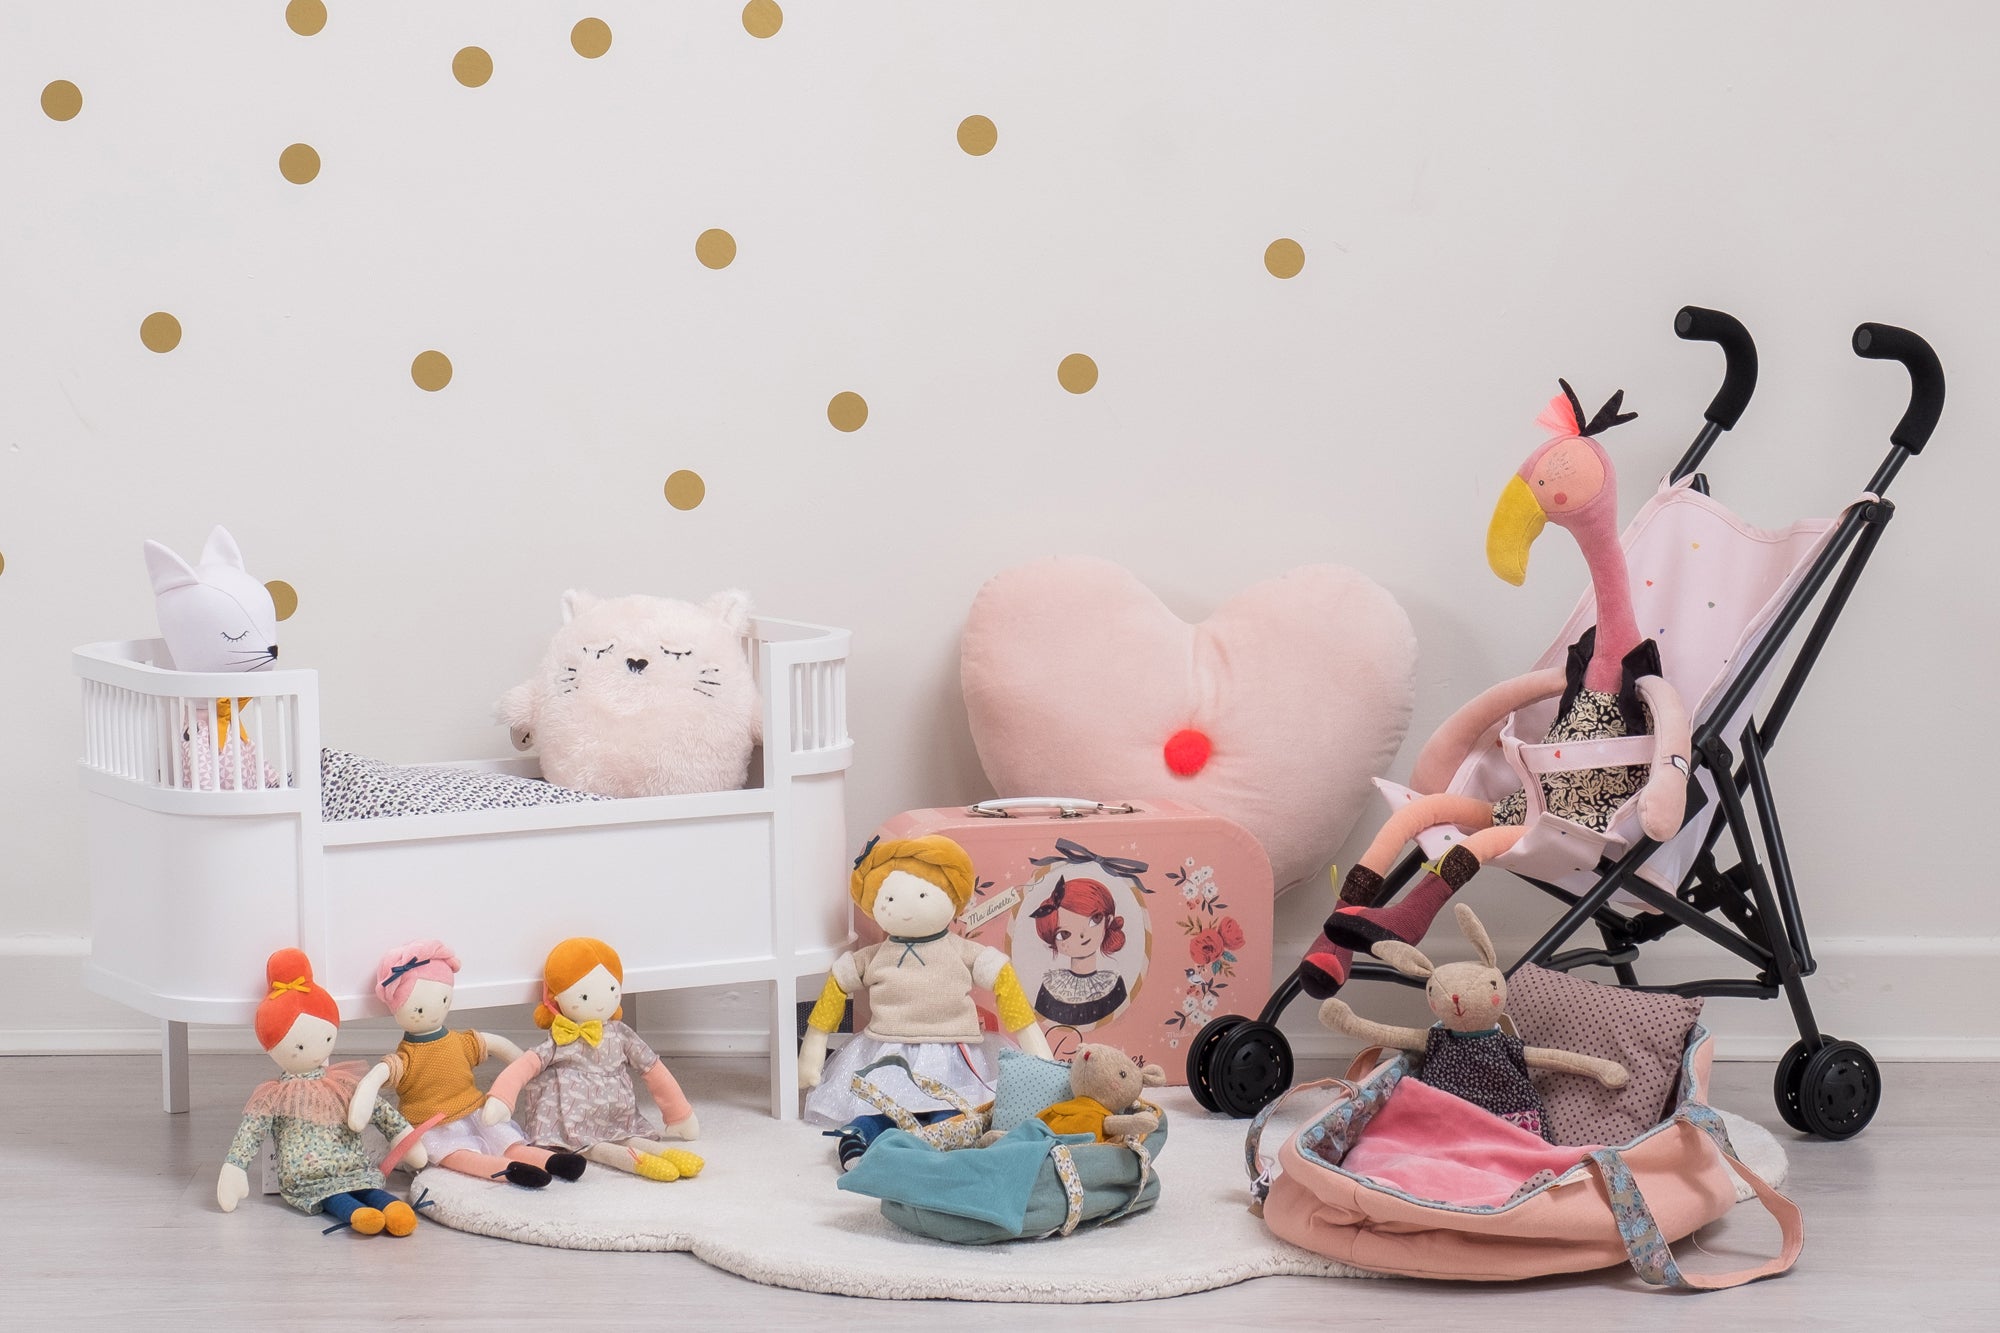 Toys and children's bedroom accessories, styled by Bobby Rabbit.